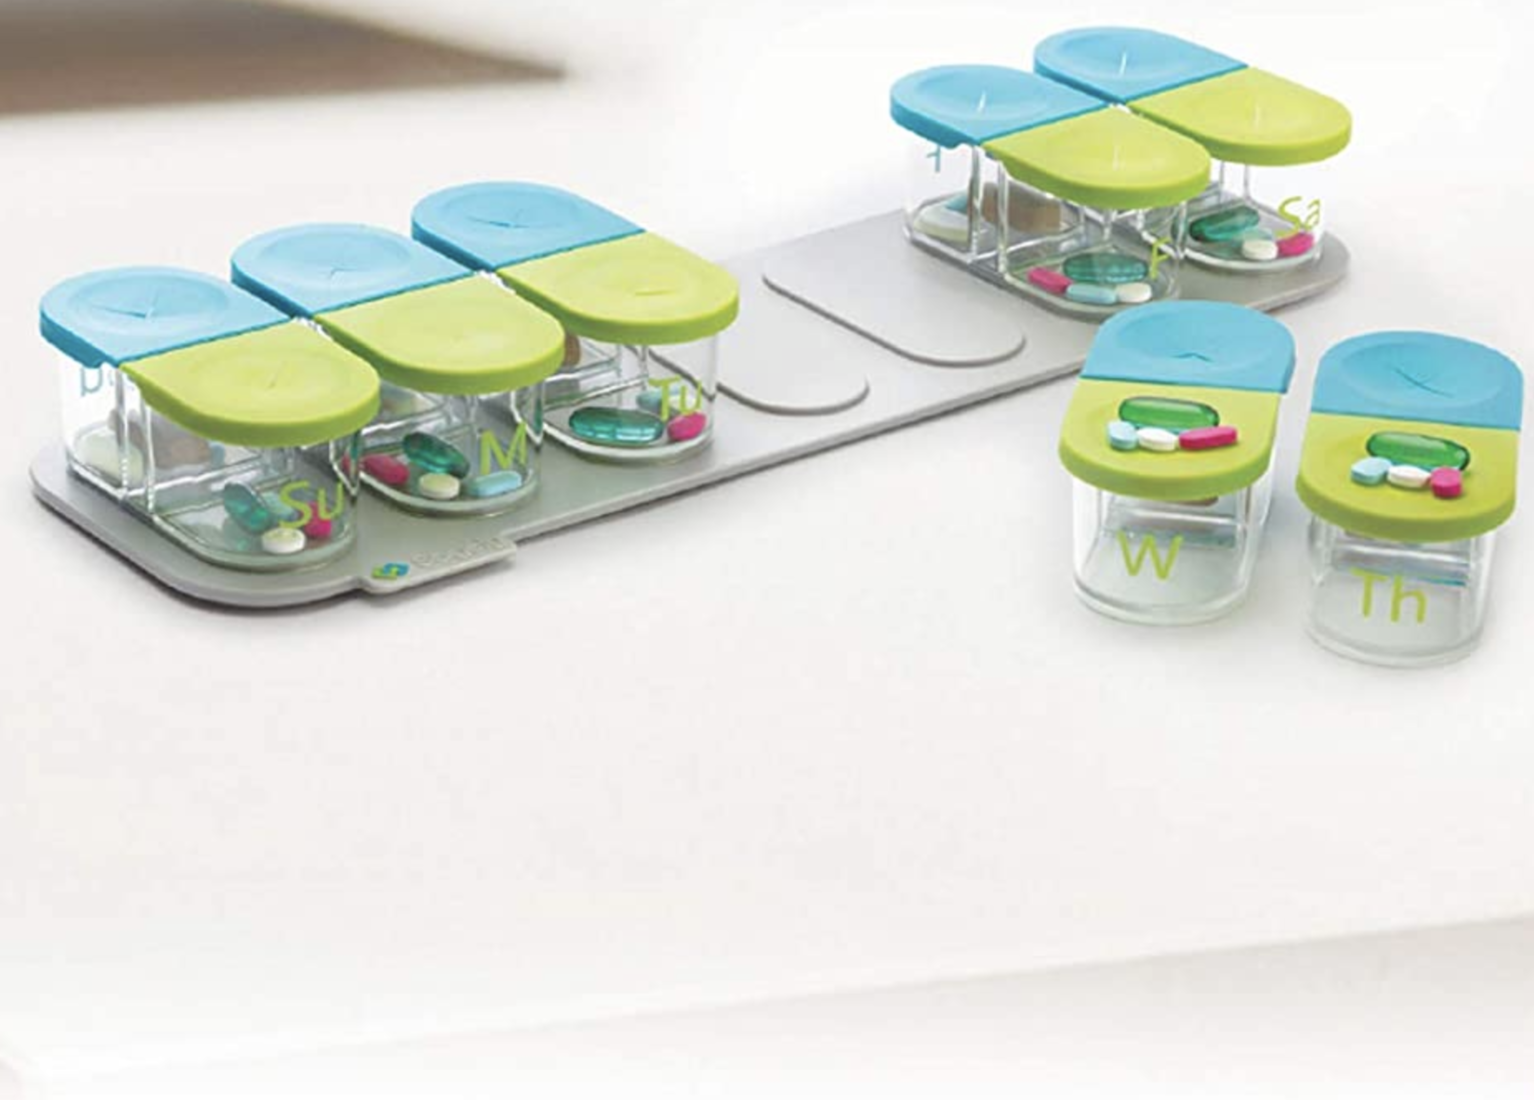 Sagely SMART Weekly Pill Organizer (Mint Blue/Coral)